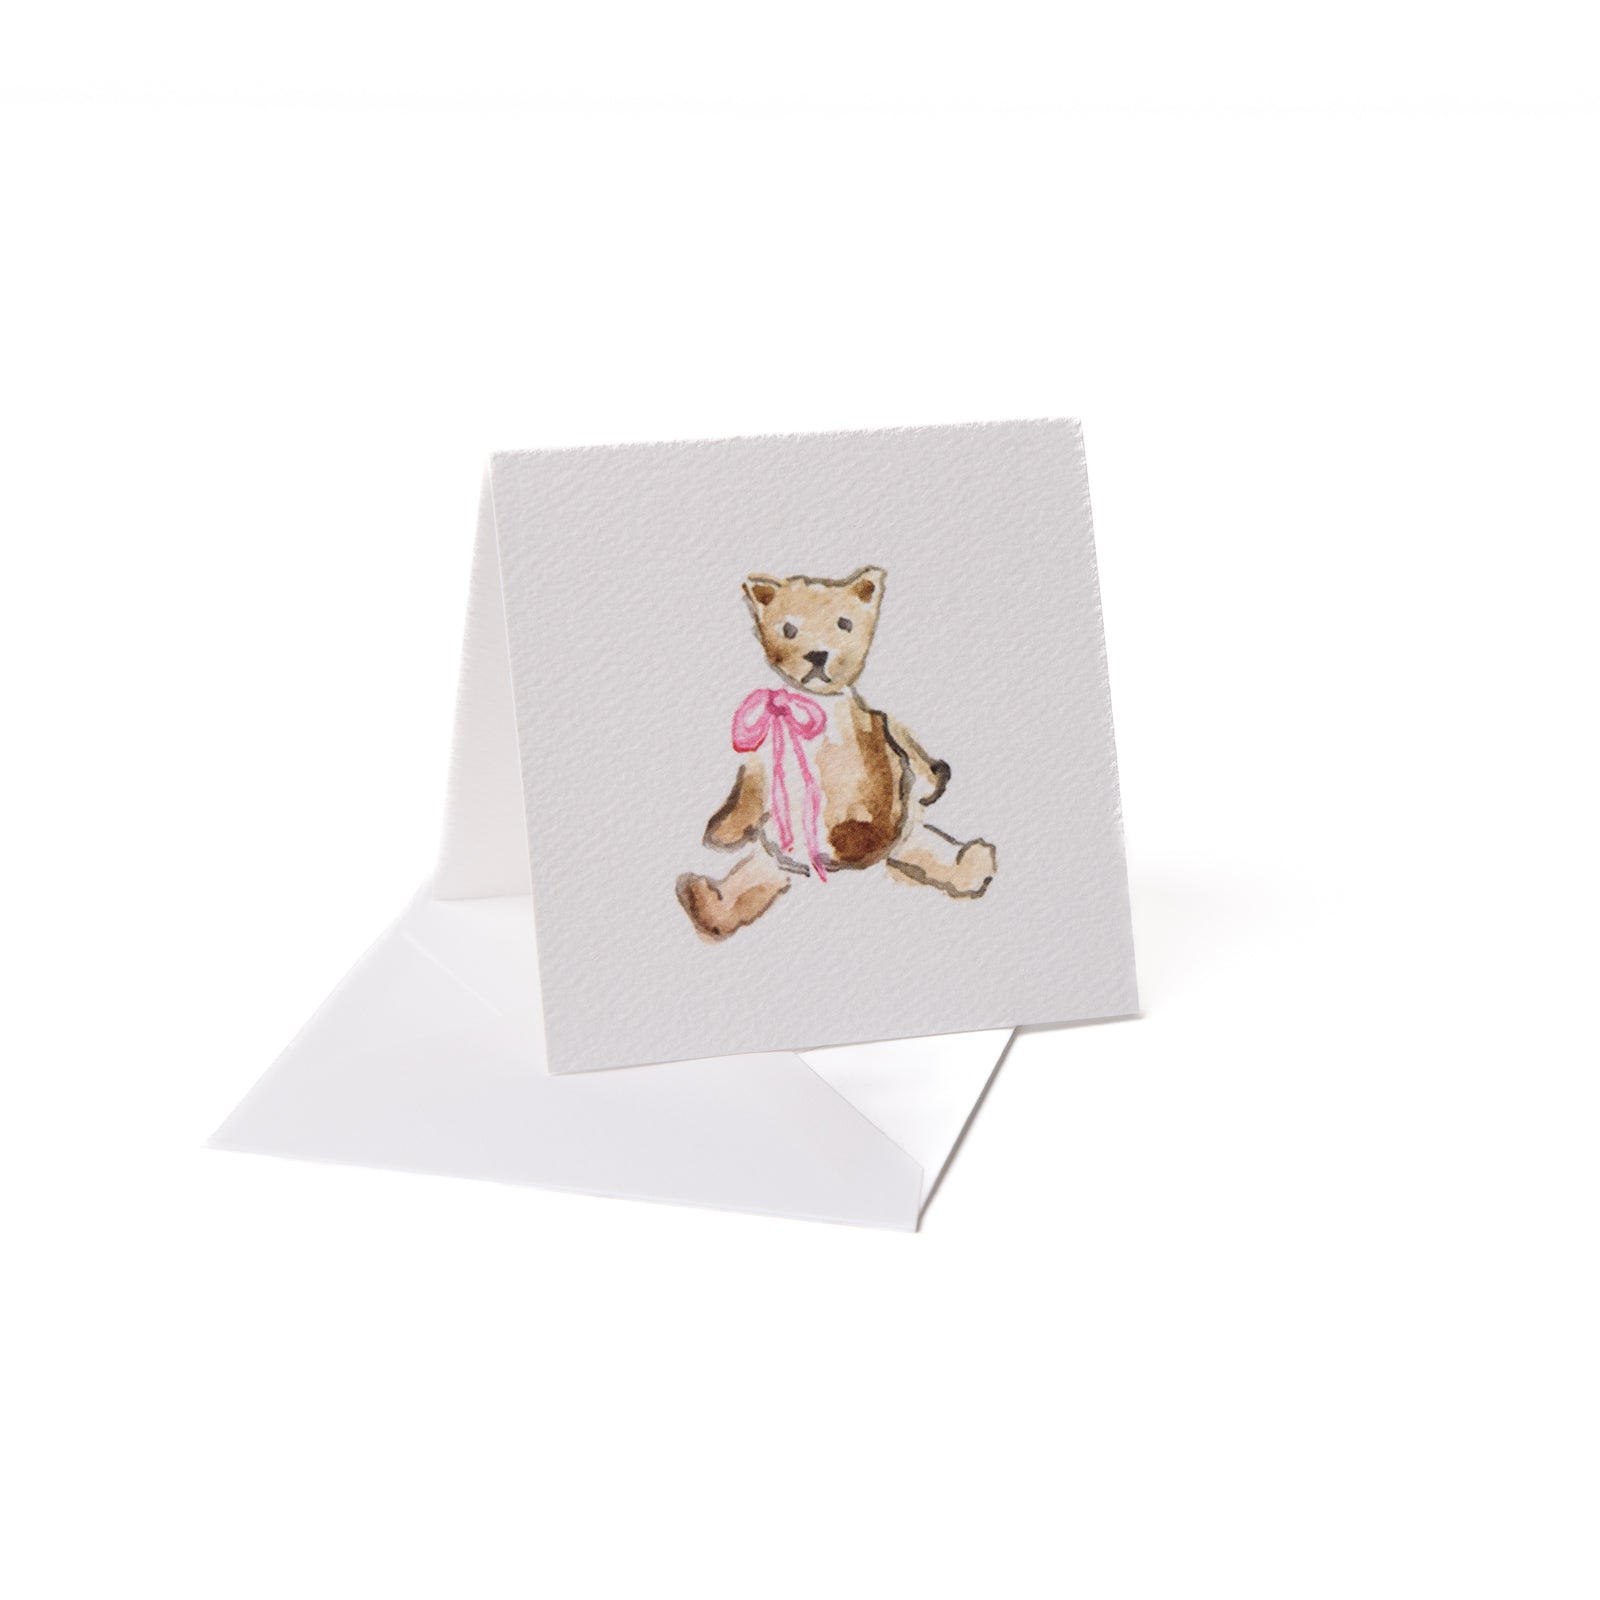 Teddy Bear with Pink Bow Enclosure Card